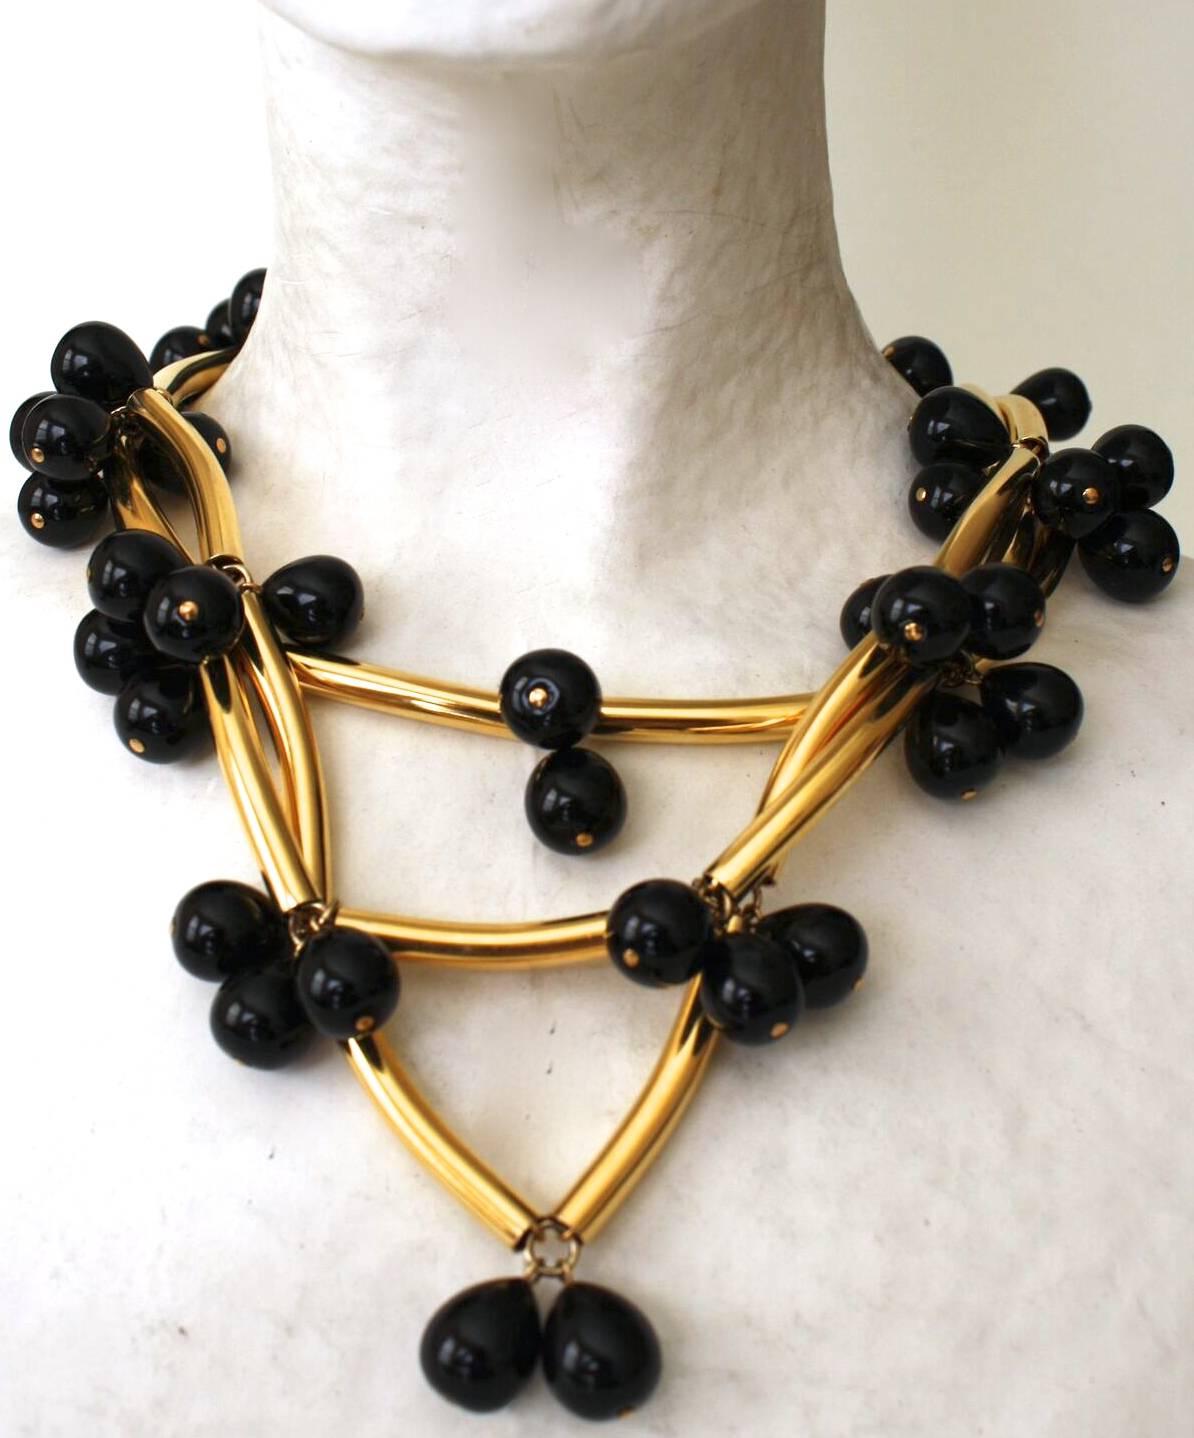 An Isabelle K Jewelry best seller! This famous necklace from Francoise Montague is made with tubes in a gold metallic treatment and black handmade glass pearls. 

As seen in the book Les Paruriers, Bijoux de le Haute Couture

16